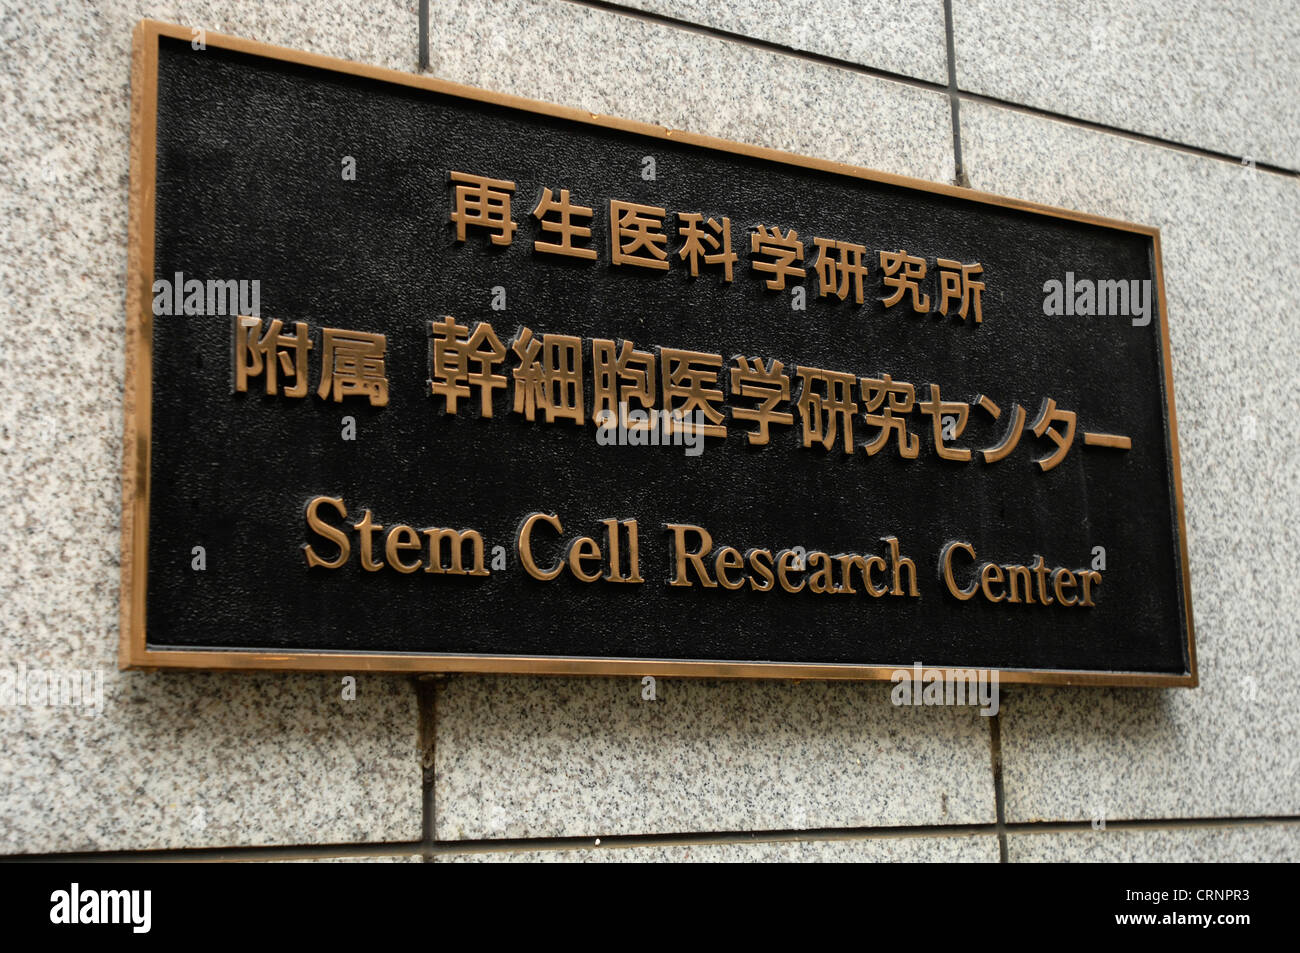 medicine Research Stem Cell Stock Photo